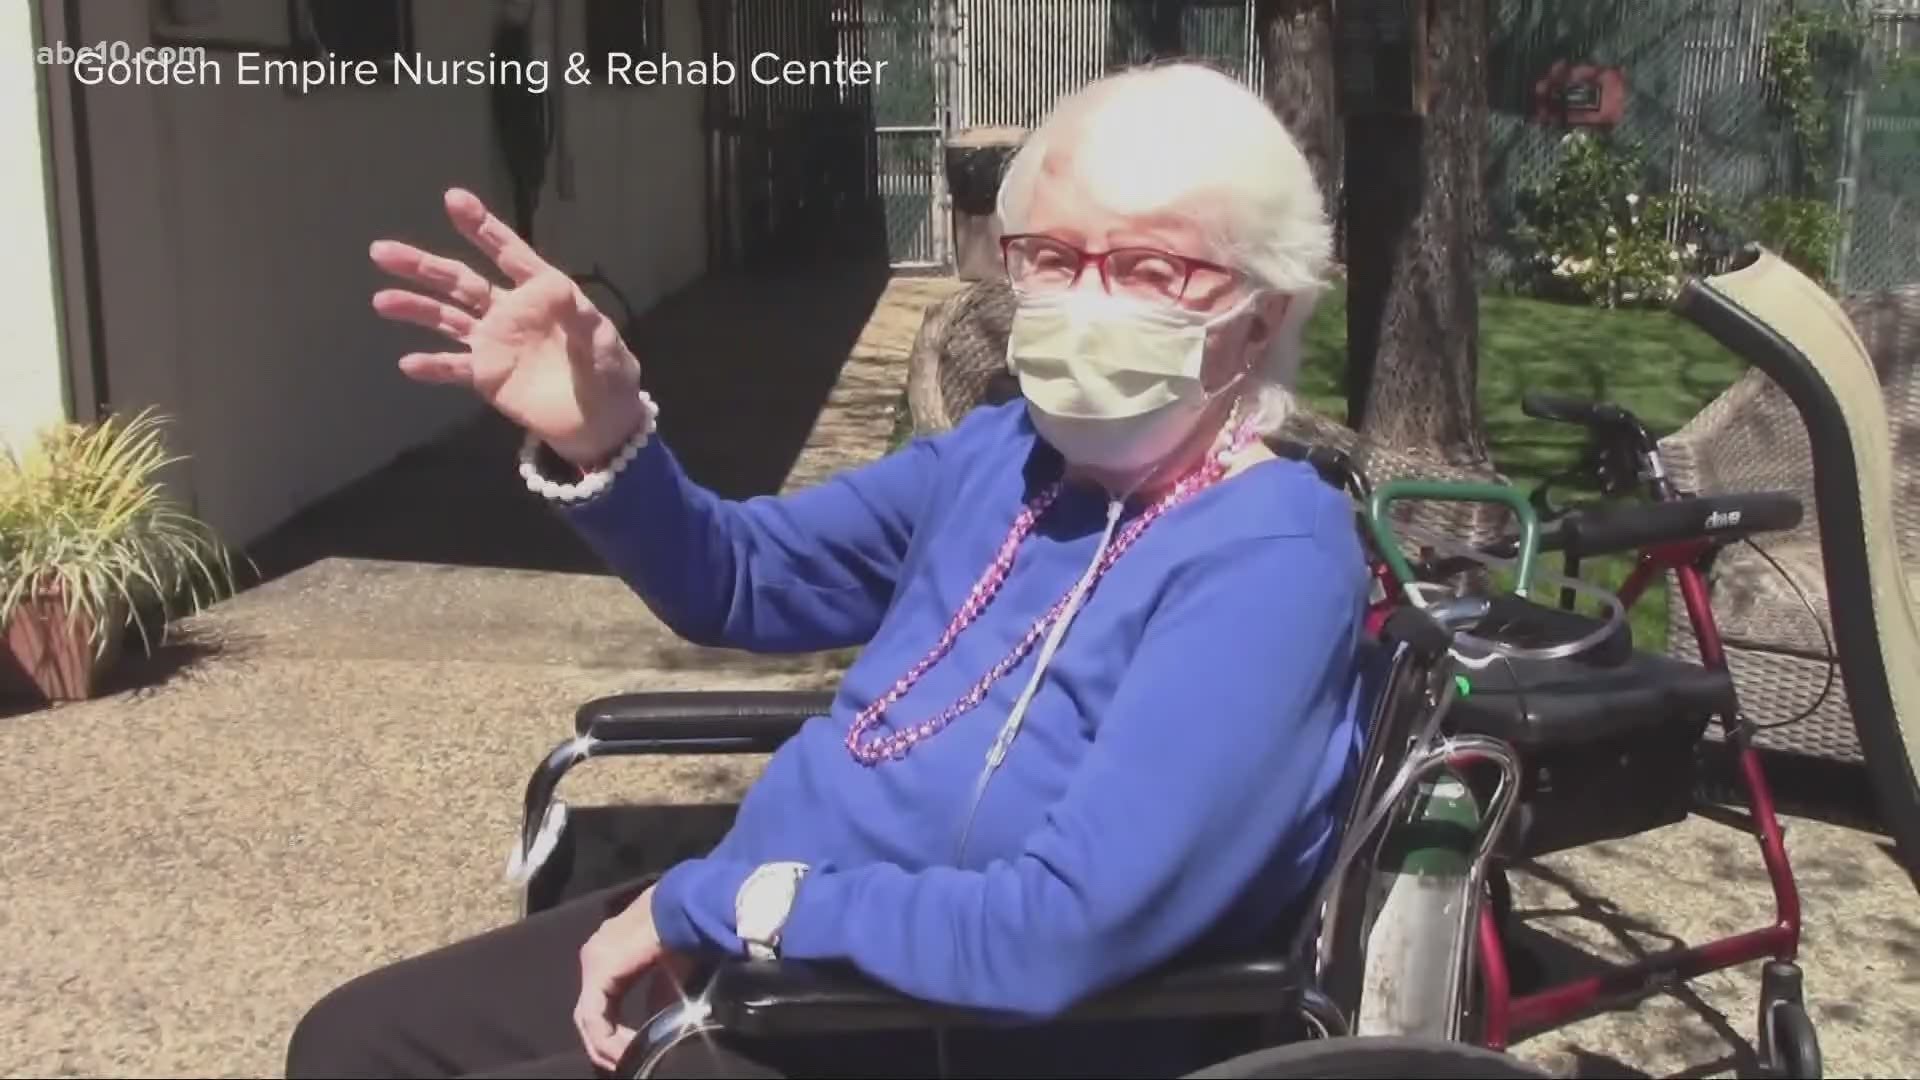 Golden Empire Nursing and Rehab Center shares how they keep their elderly residents connected to their loved ones and to make sure, they're still healthy.